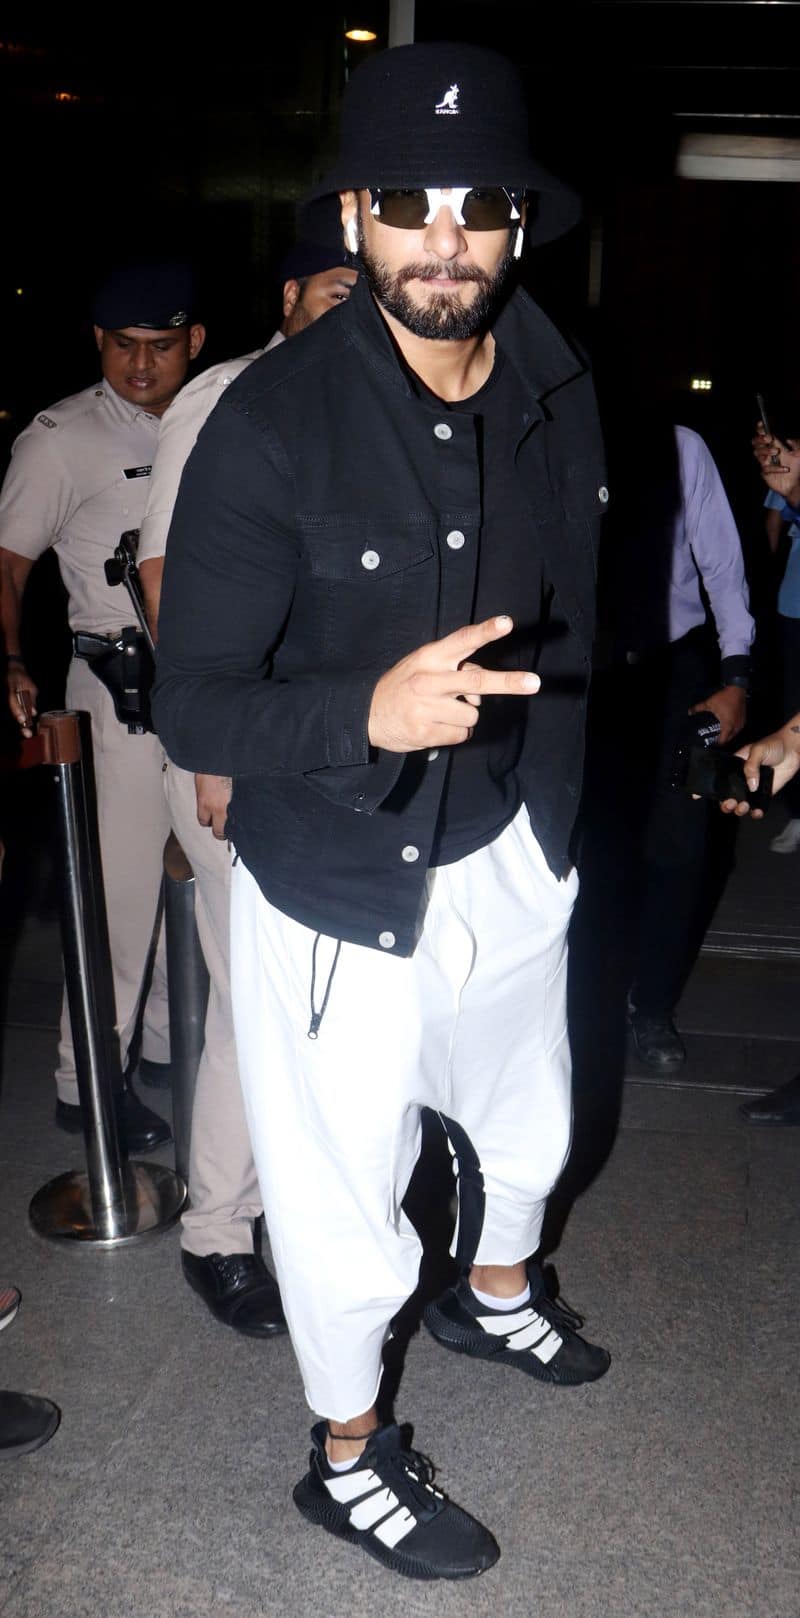 DeePee's hubby dearest, Ranveer Singh, looks to be attempting another 'sperm airport look' though this one seems more comfortable. He does wear the quirky glasses well though.